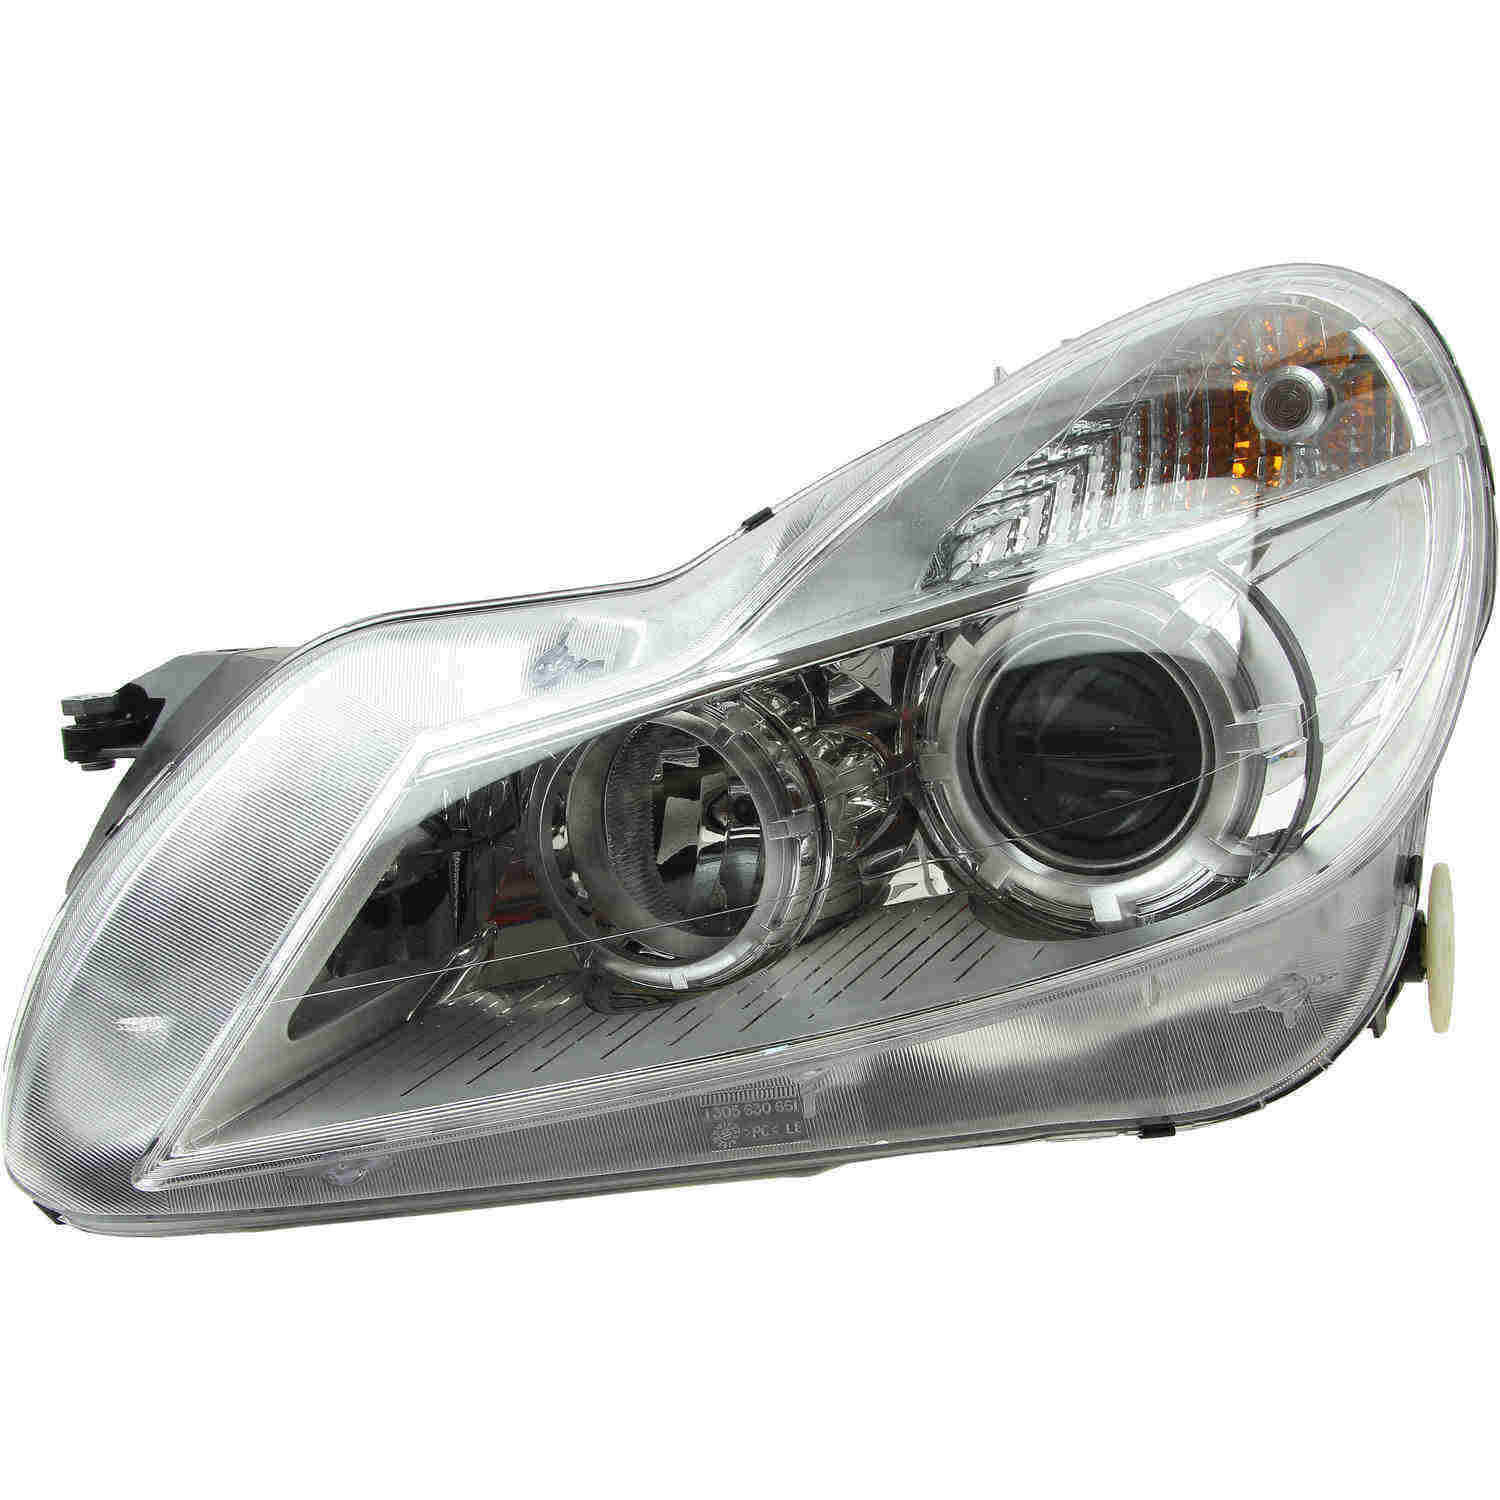 Magneti Marelli Front Driver Left Headlight Assembly For Mercedes R230